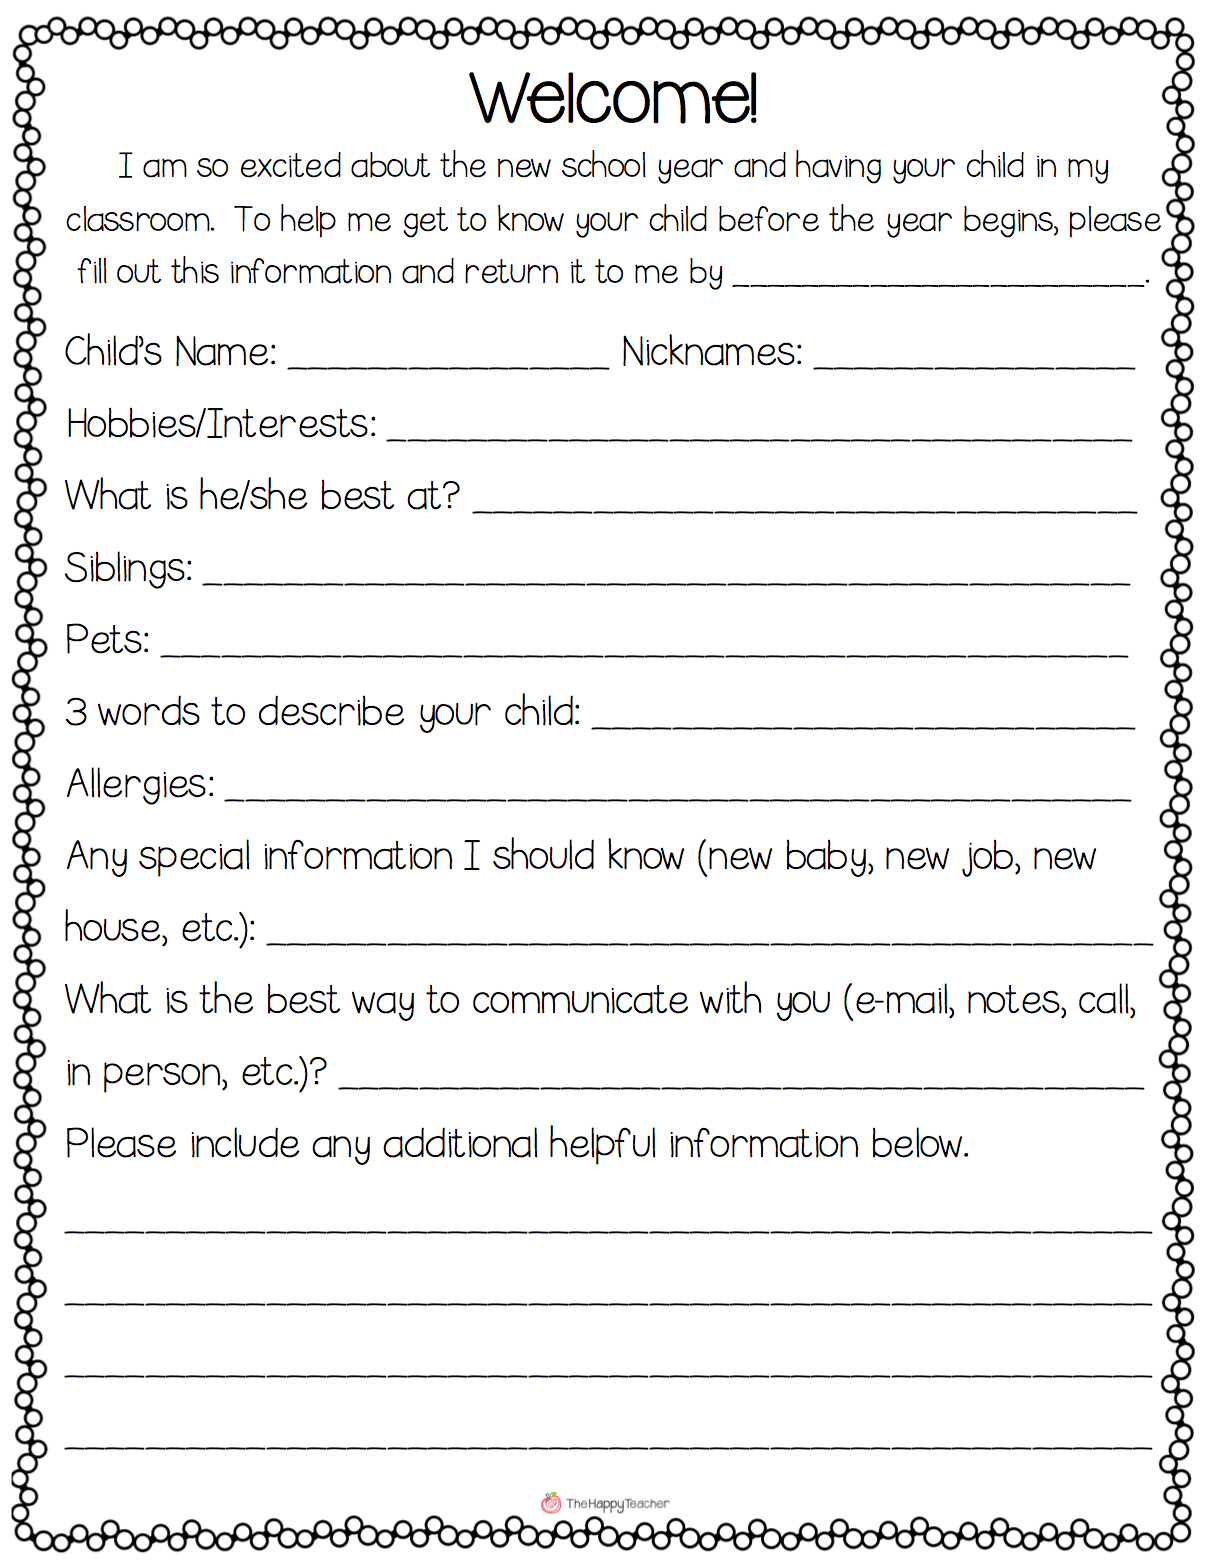 Behavior Letter to Parents From Teacher Template - Open A Positive Line Of Munication with Parents From Day 1